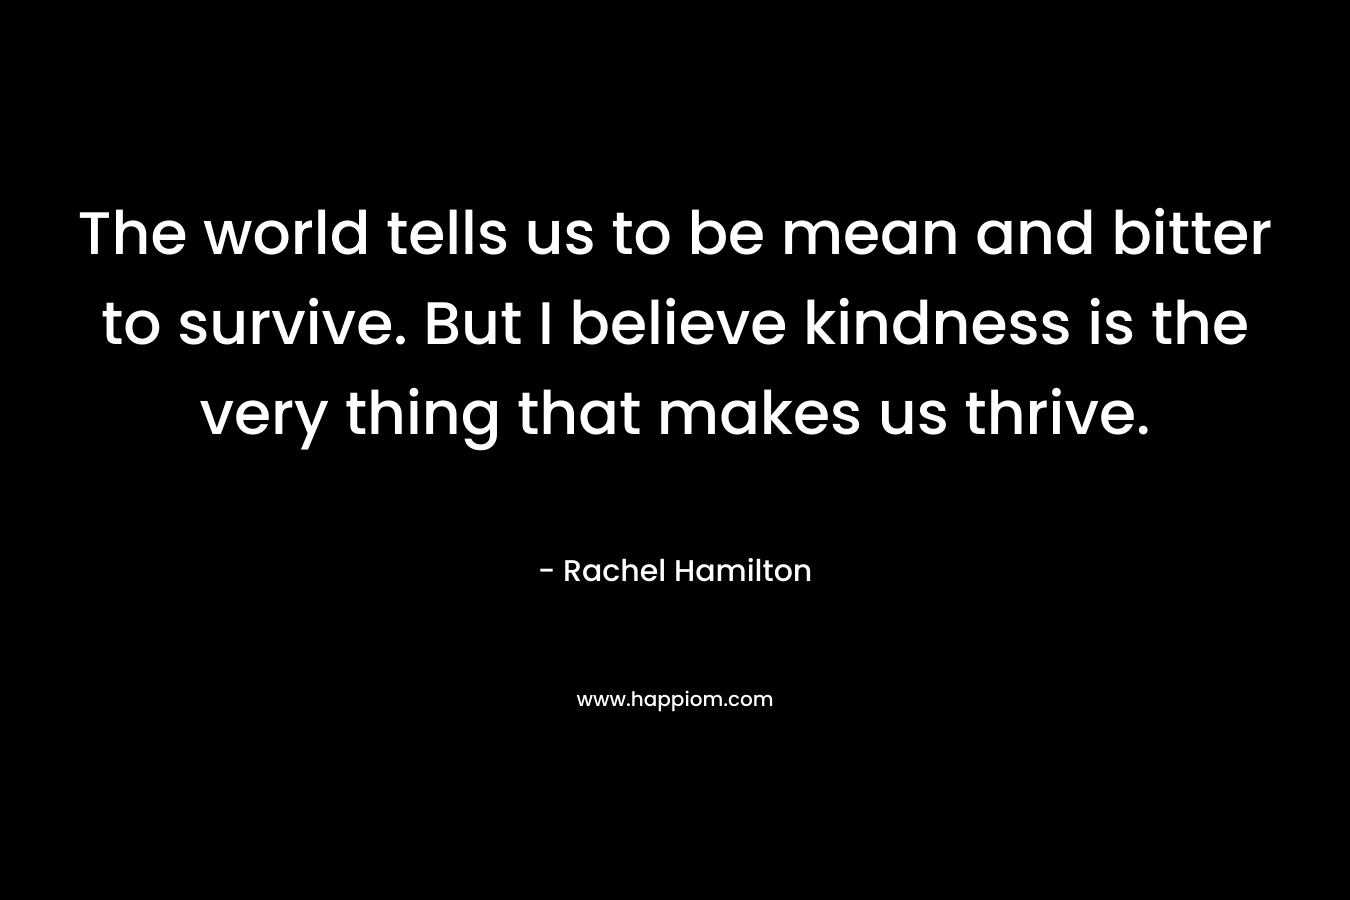 The world tells us to be mean and bitter to survive. But I believe kindness is the very thing that makes us thrive.